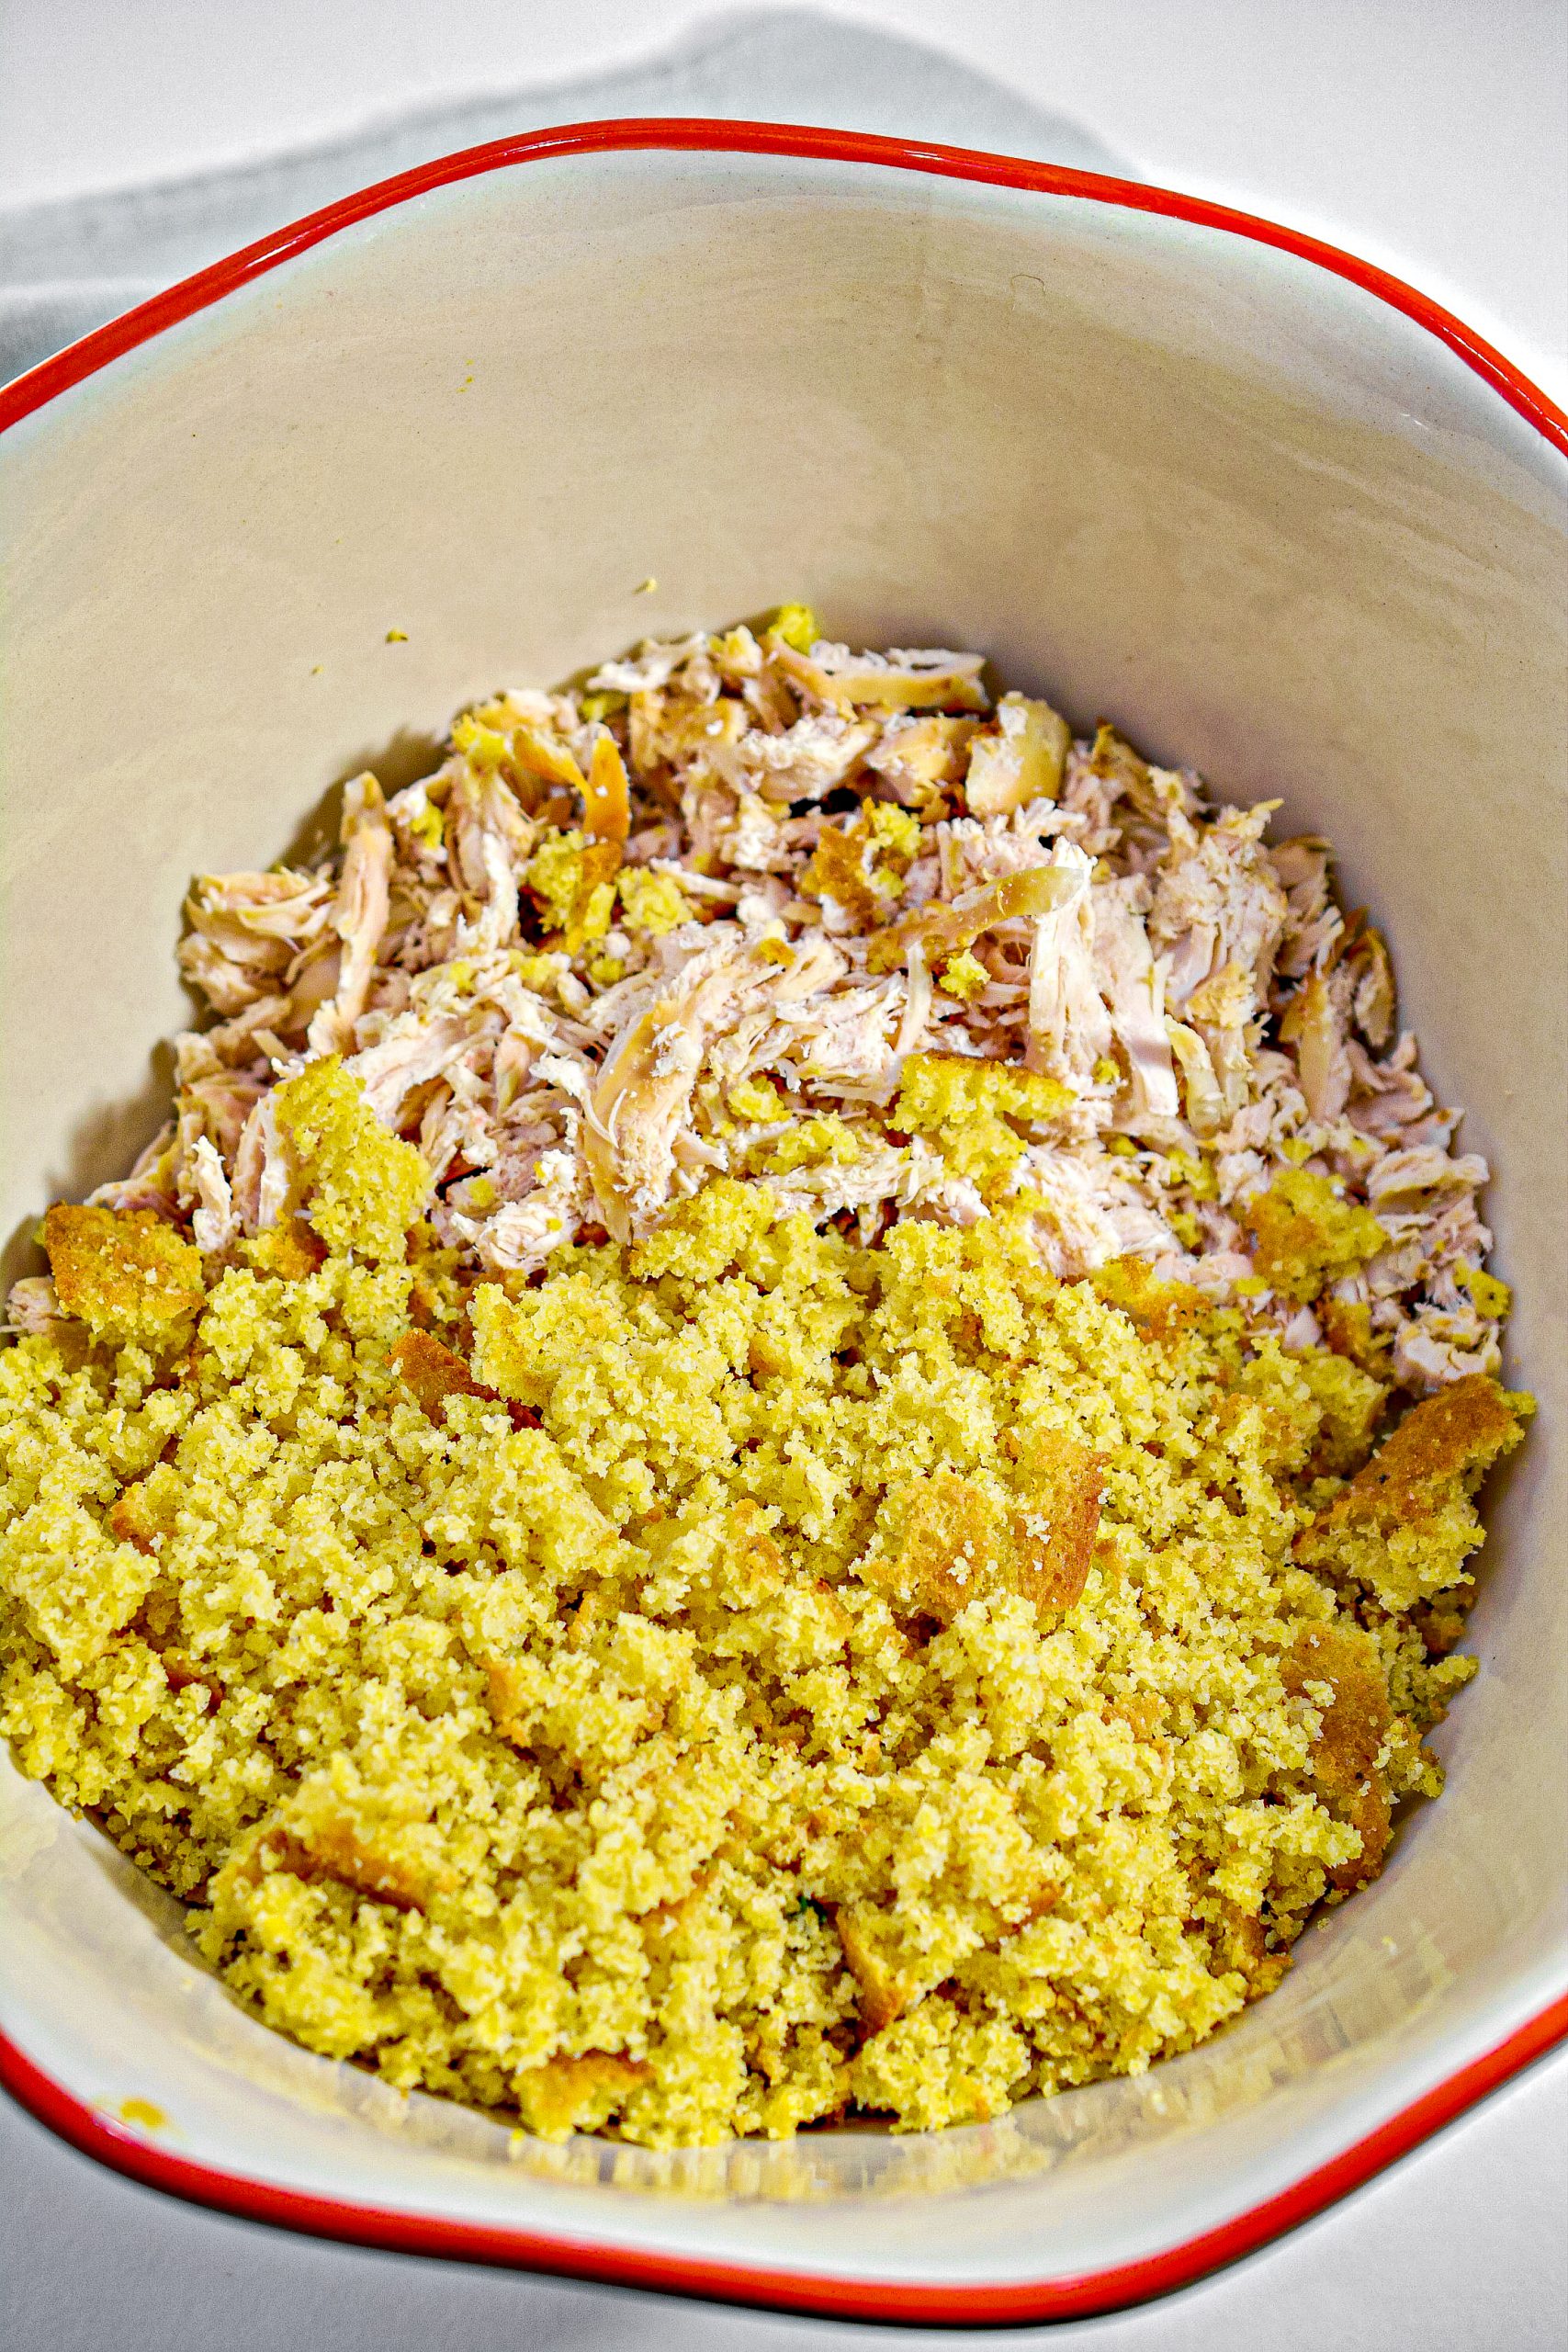 Mix together the crumbled cornbread, chicken, and cooked vegetables in a large mixing bowl.